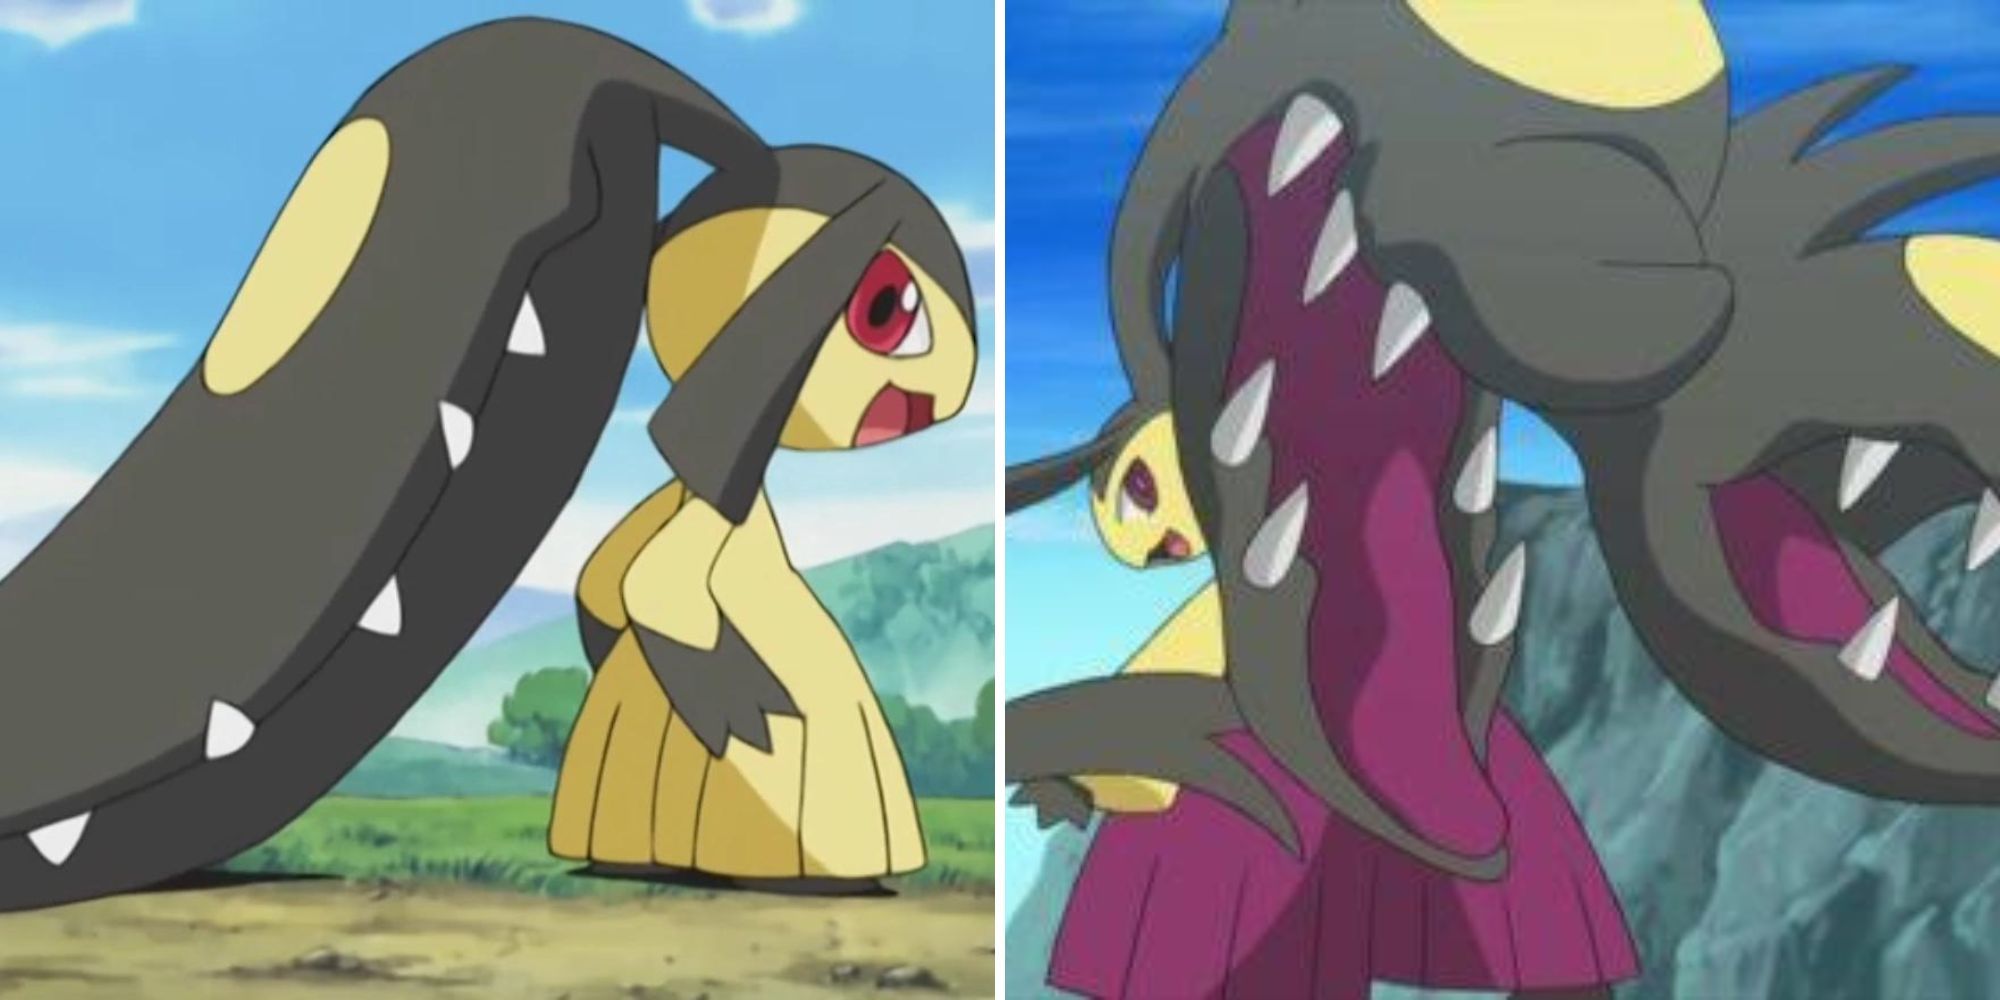 Mawile stands on a dirt path and Mega Mawile prepares to attack